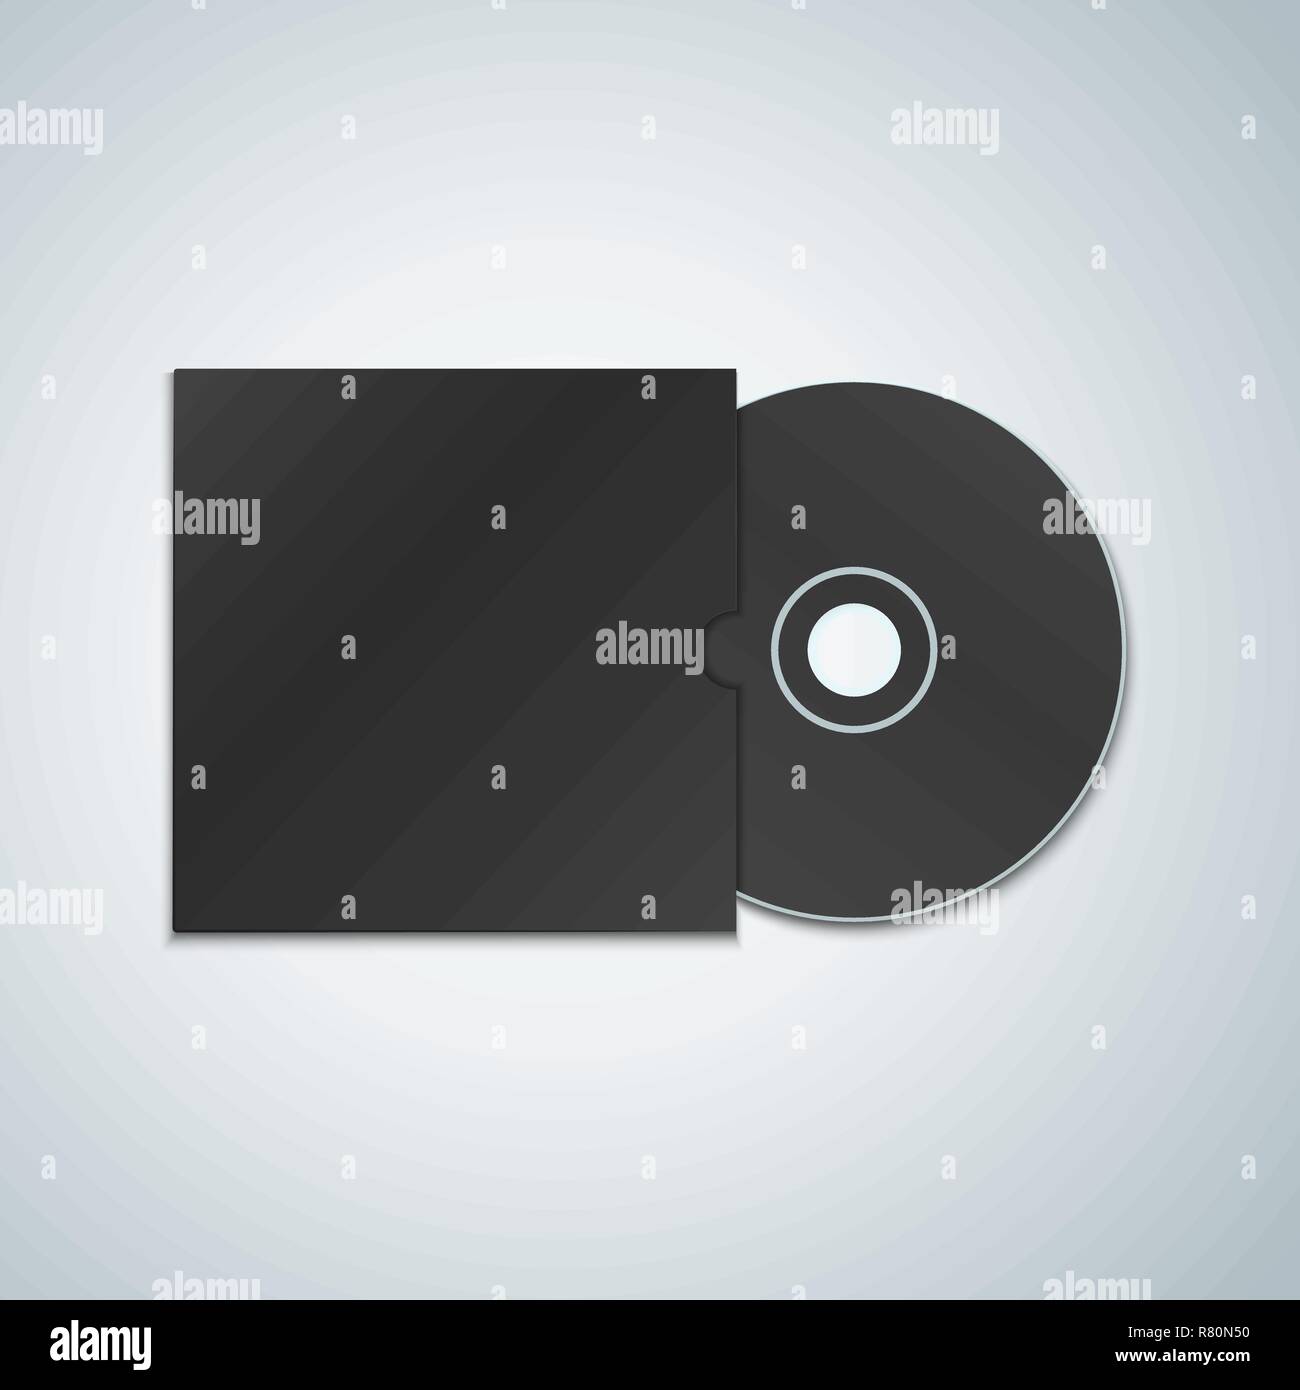 vector black paper compact disc cover mock up blank CD realistic illustration with shadow template design isolated on light background Stock Vector